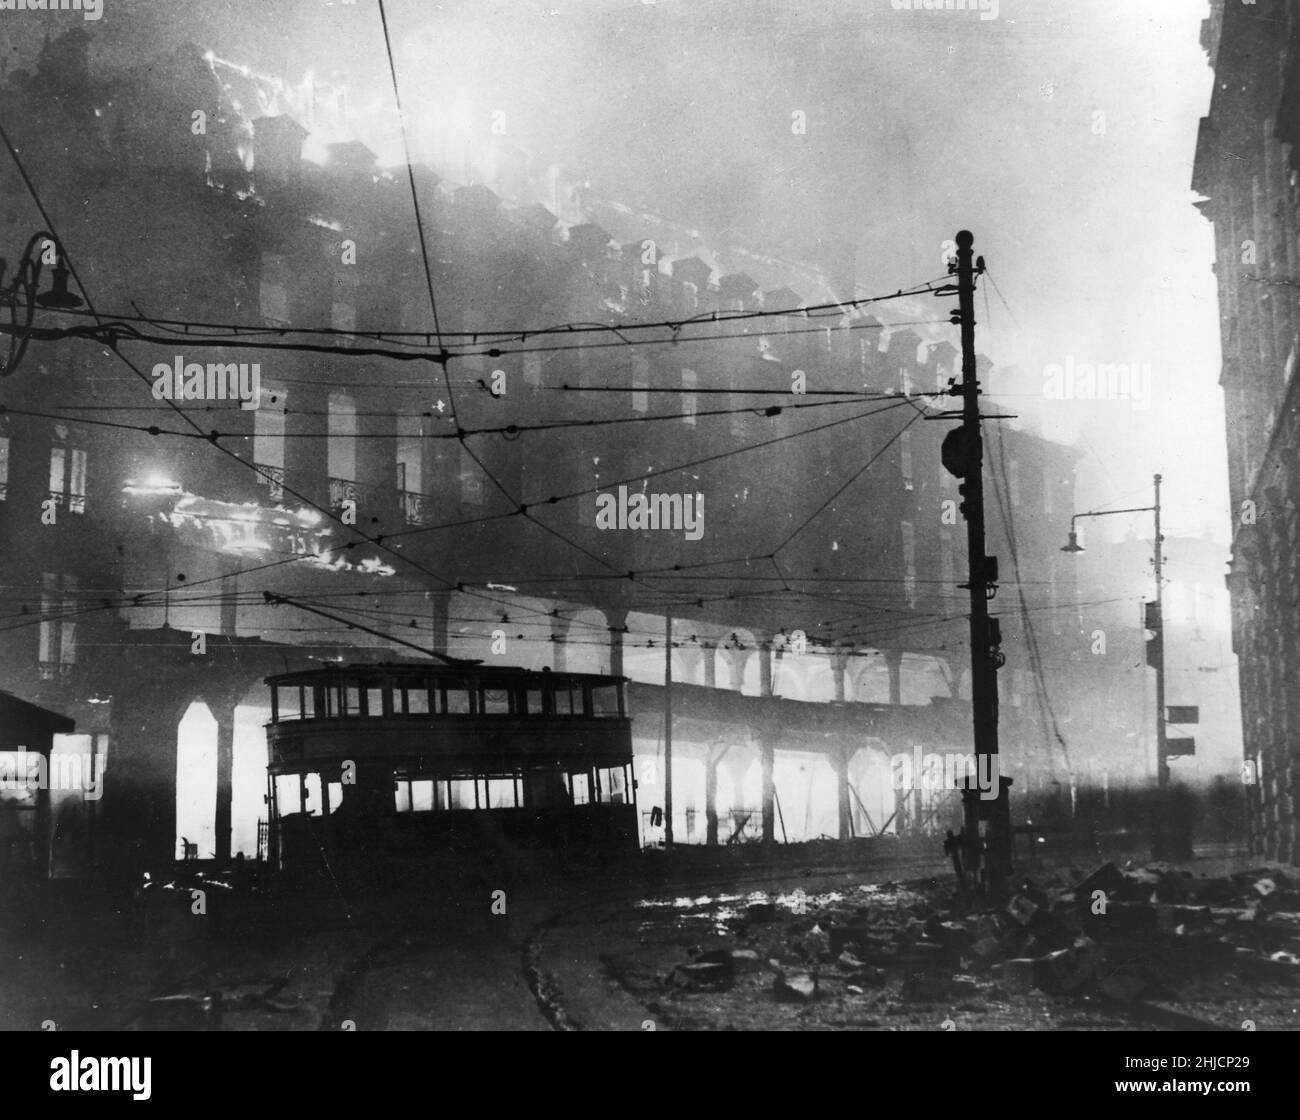 A burning building in Sheffield during the Blitz, 13th December 1940.  The Blitz was a German bombing campaign against the United Kingdom in 1940 and 1941, during the Second World War. The term comes from Blitzkrieg, meaning 'lightning war' in German. Stock Photo